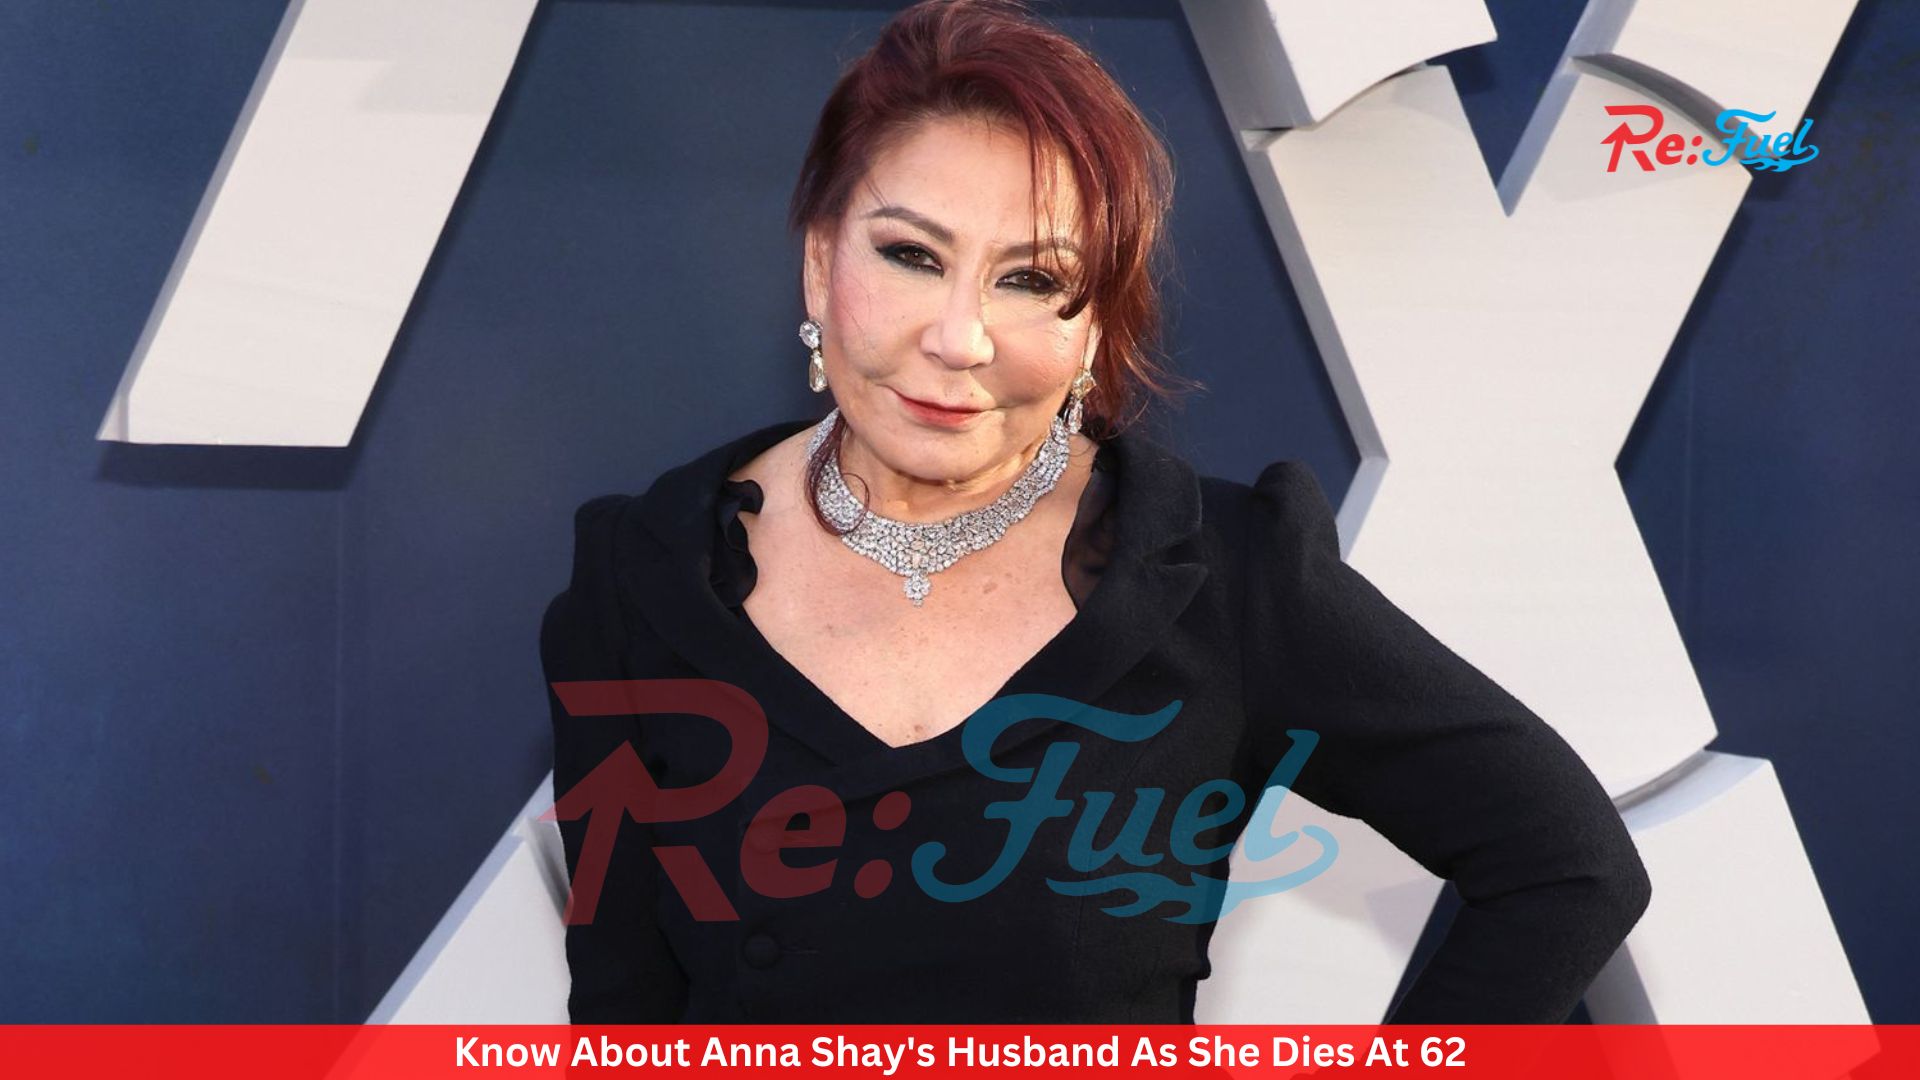 Know About Anna Shay's Husband As She Dies At 62